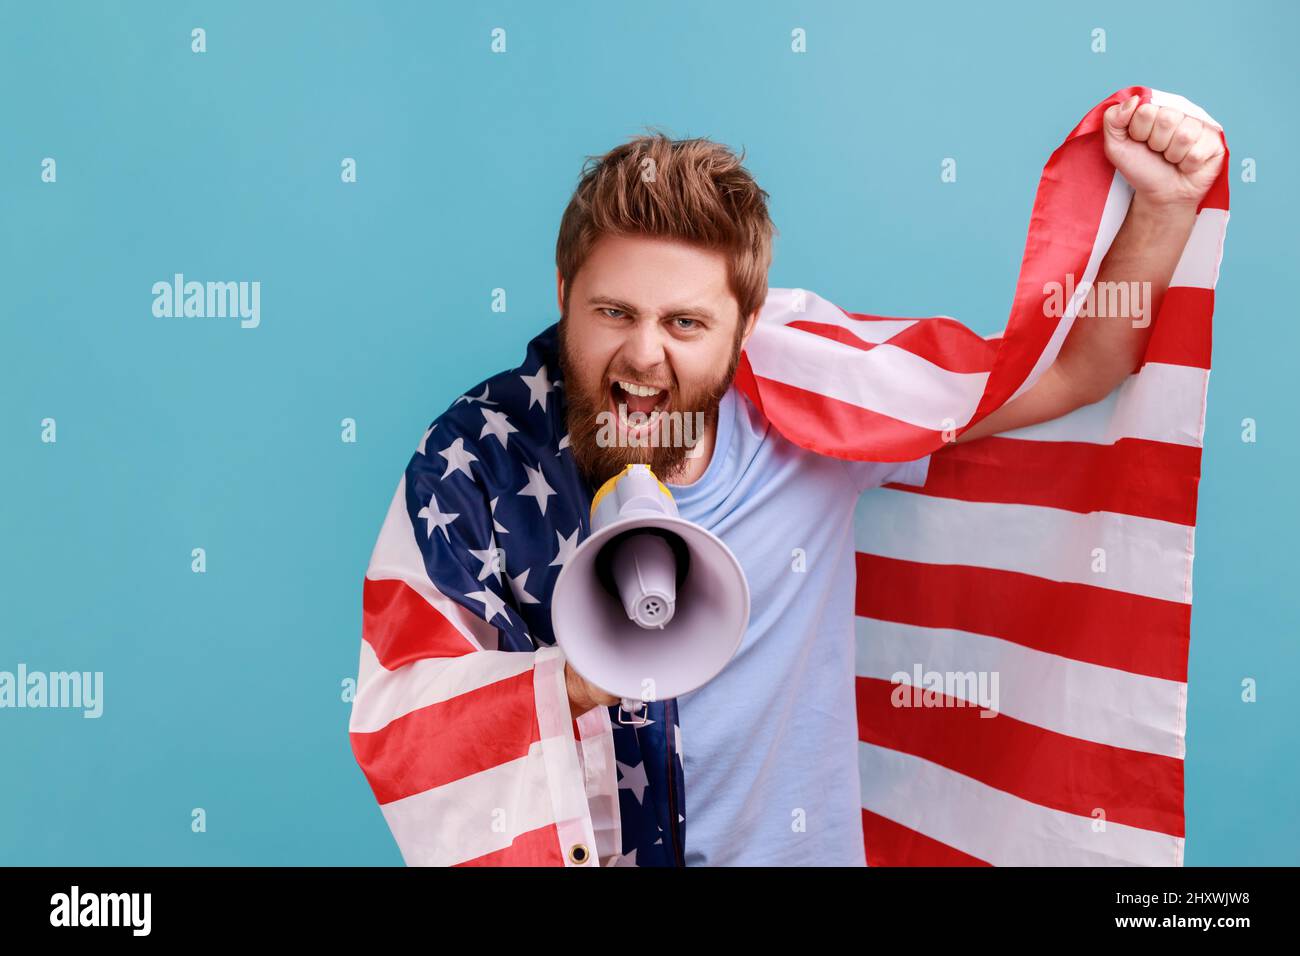 Portrait of excited self-confident bearded man screaming at loudspeaker holding flag of united states of america, patriotic protest. Indoor studio shot isolated on blue background. Stock Photo